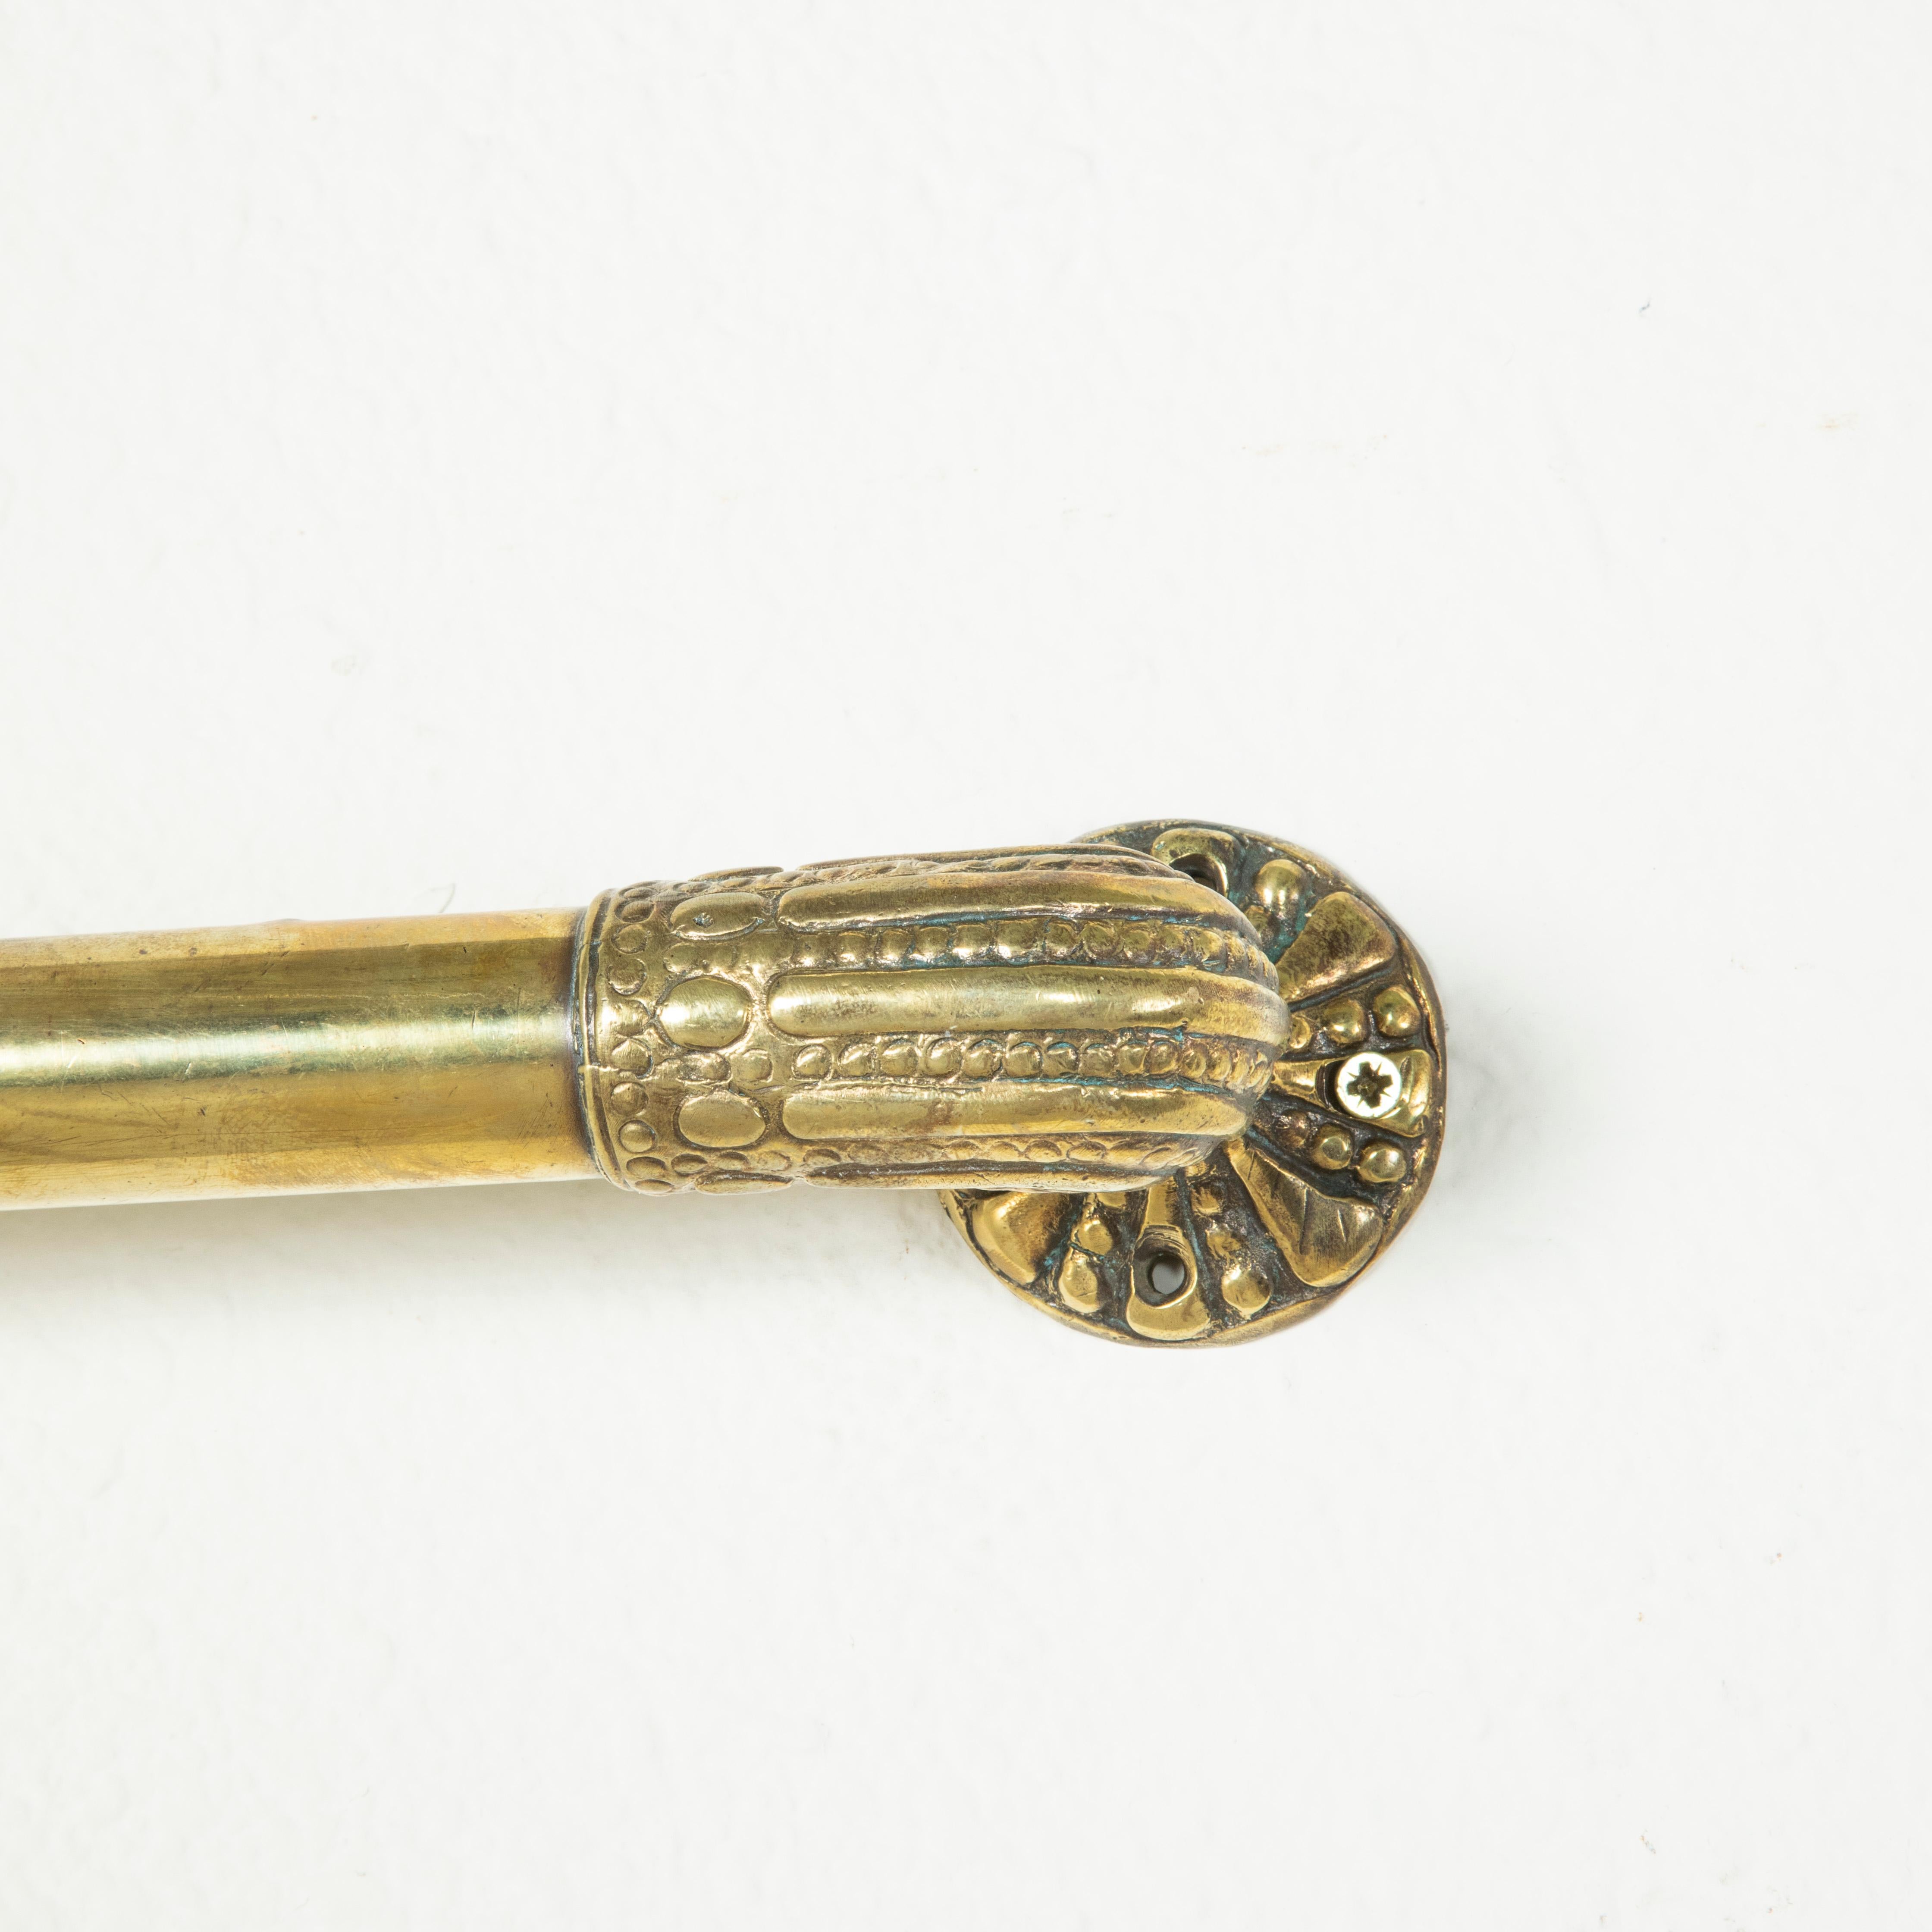 Early 20th Century Long French Brass Hand Rail or Towel Bar with Beaded Motif, circa 1900